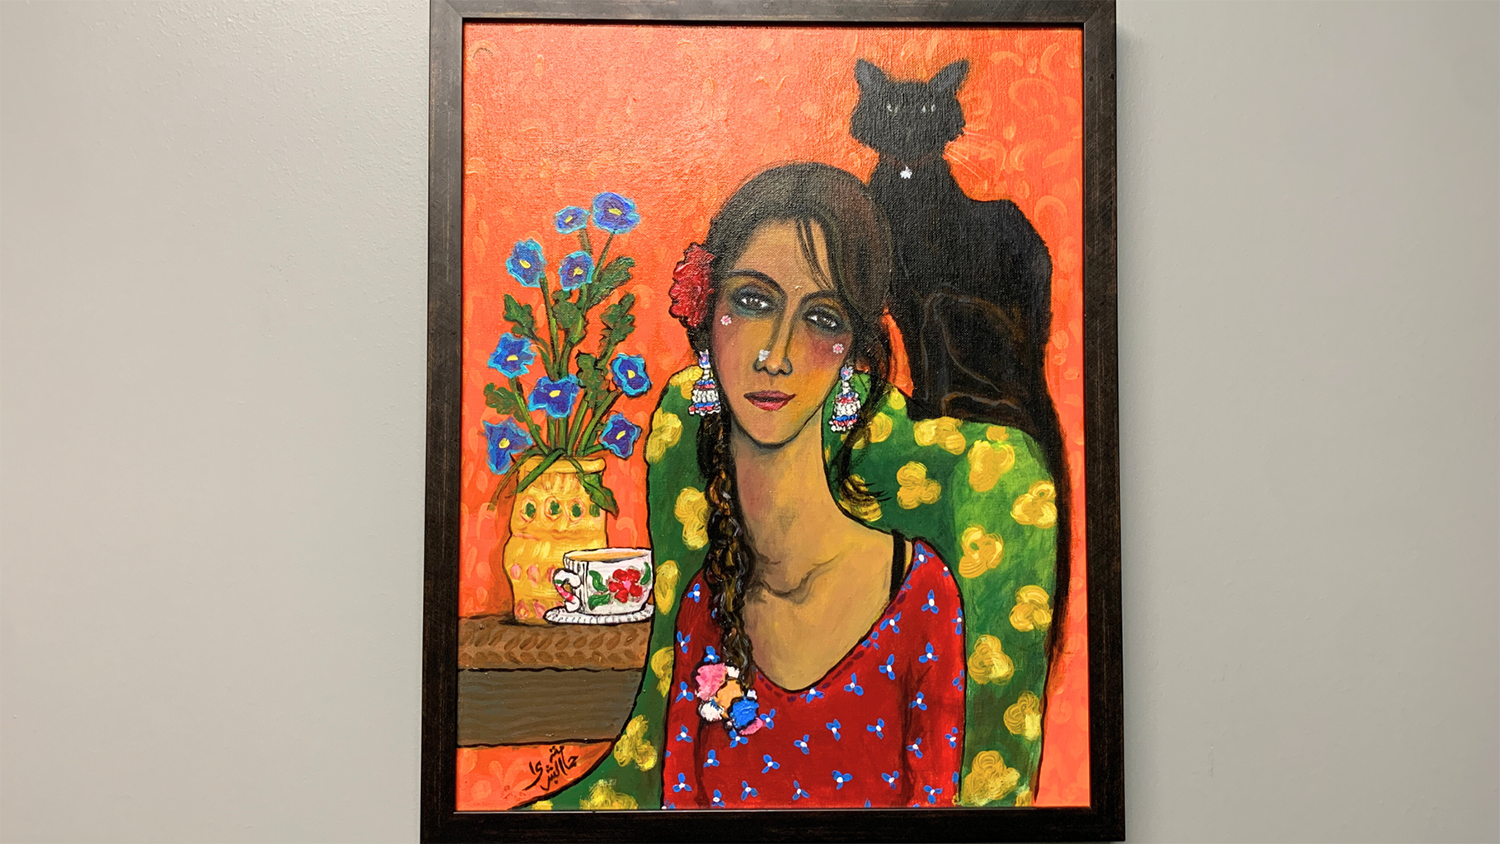 A painting by Hamama Bushra hangs on a wall as part of an exhibit at Art at the Center.